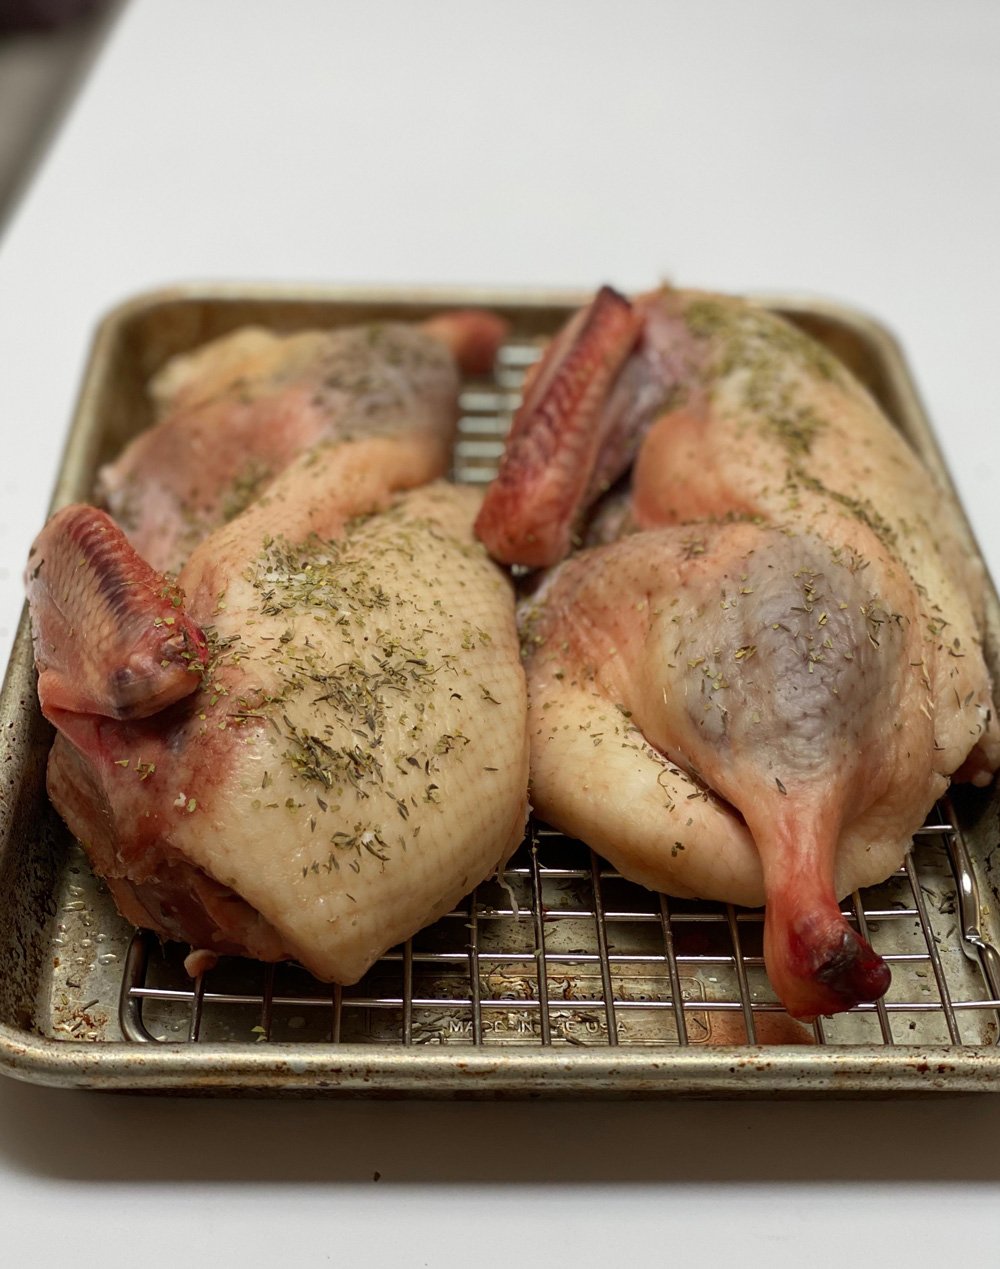 The herbs spread out on the top of the duck.